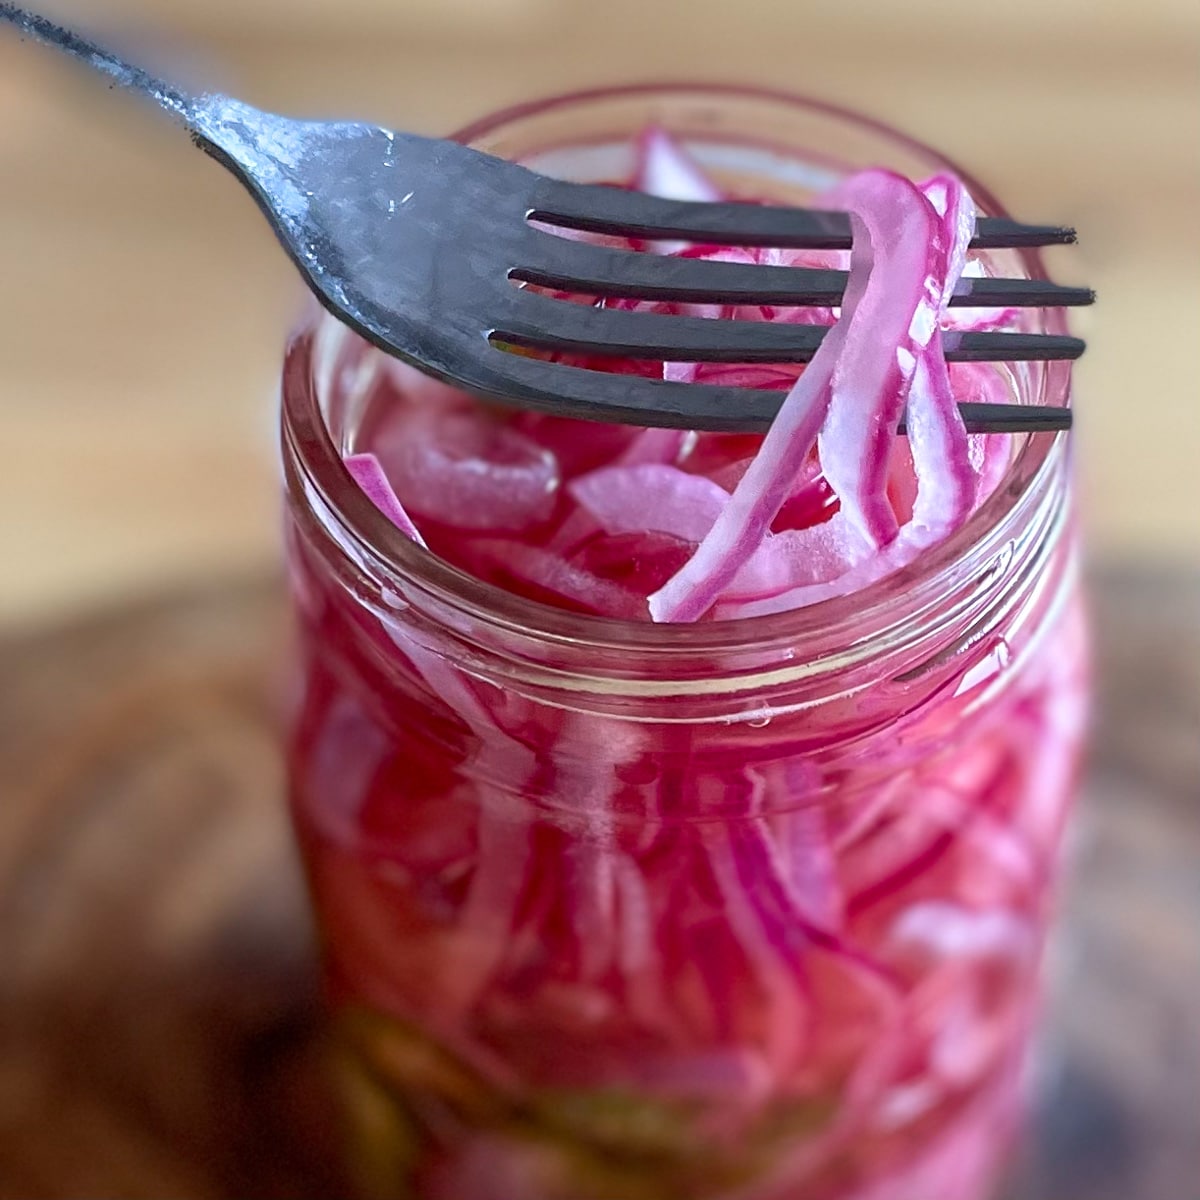 Sliced red spicy pickled onions are lifted out of a glass Mason jar with a silver fork.